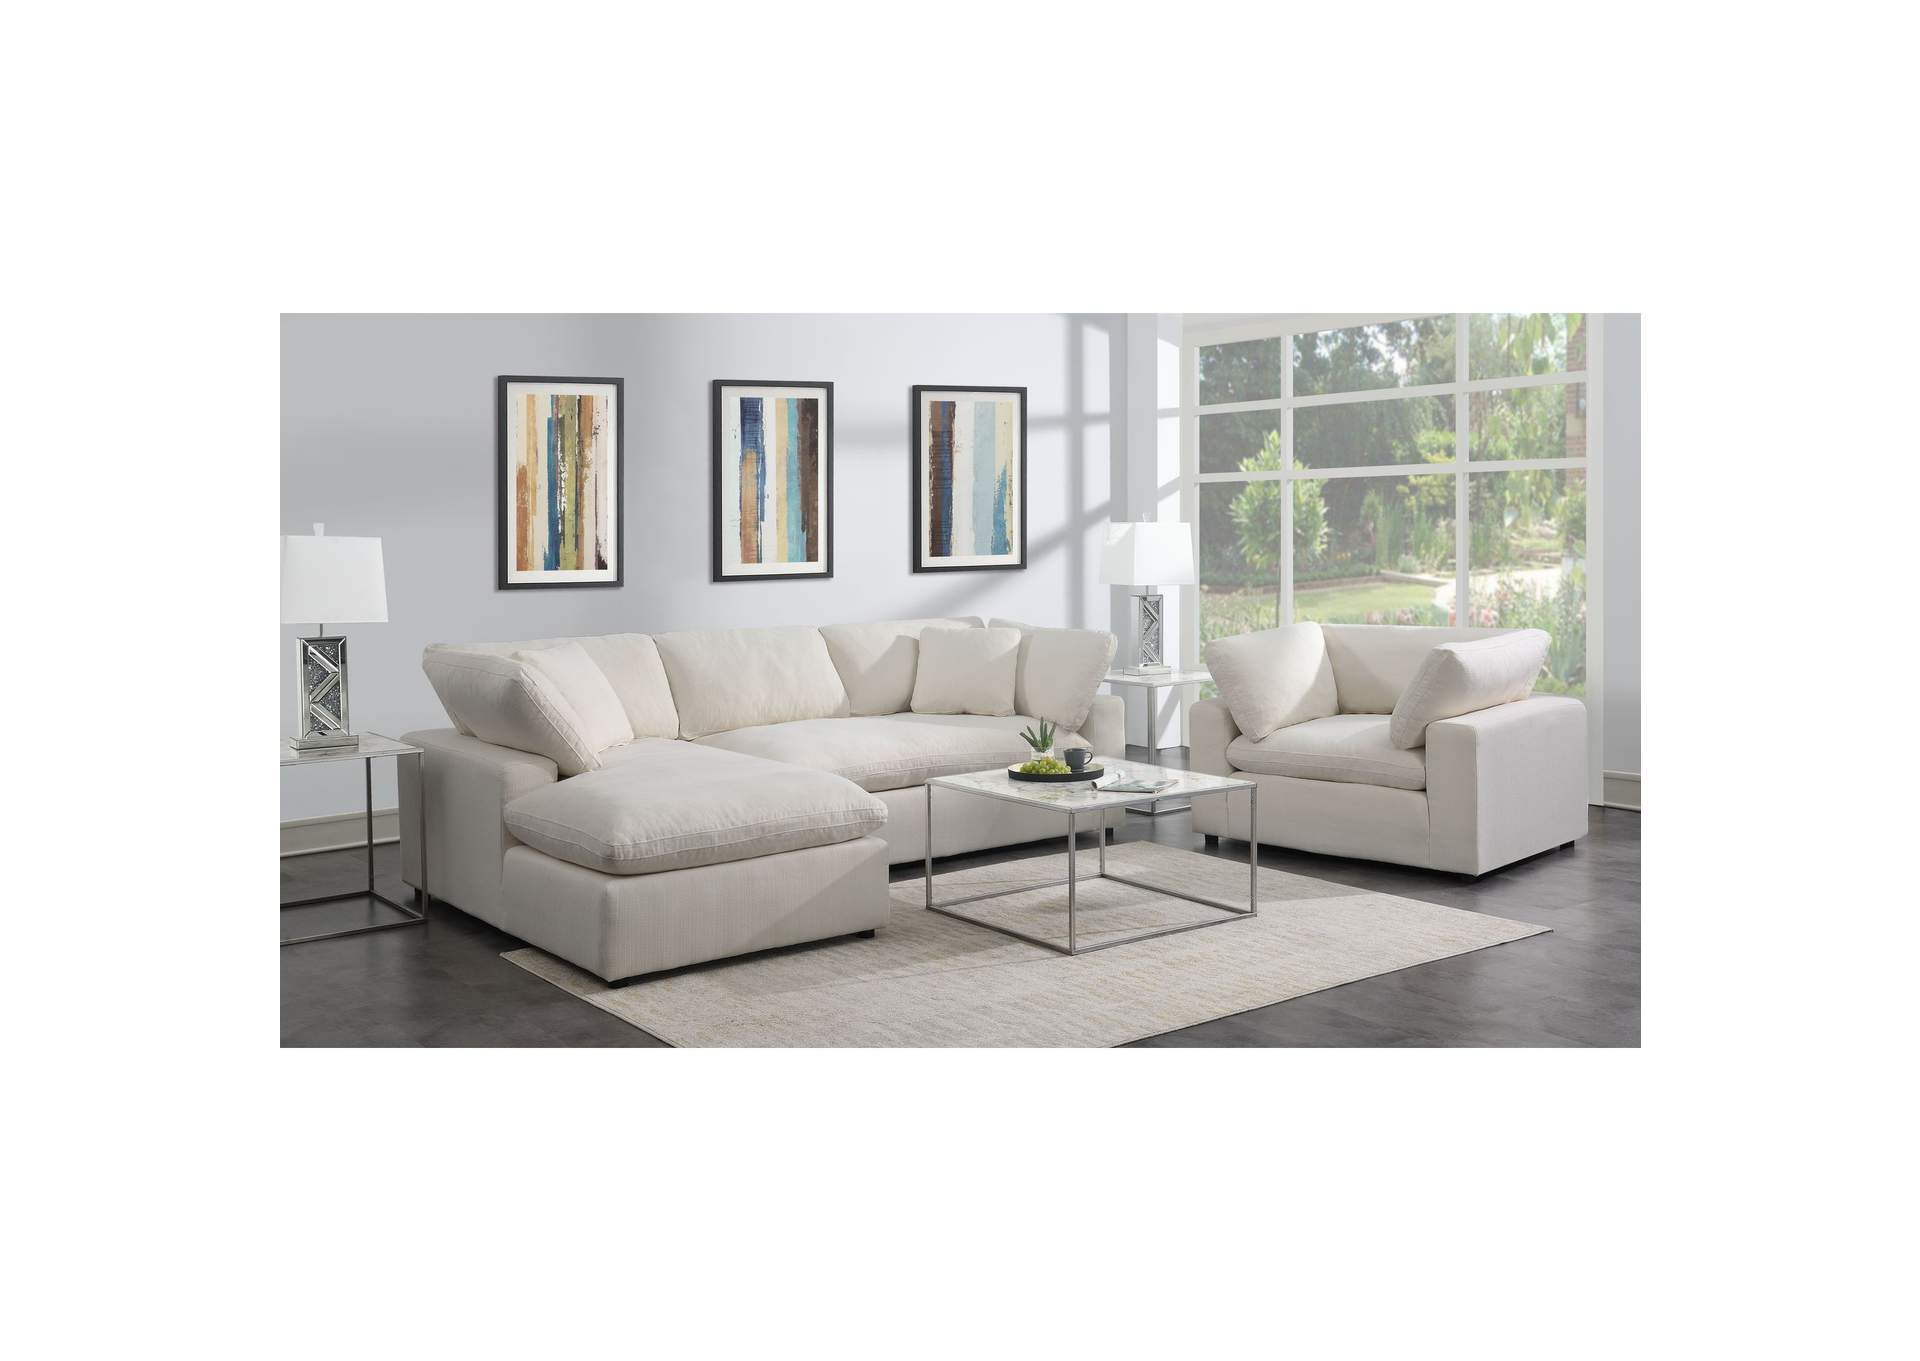 Cloud 9 Chaise Right Hand Facing Chaise In Garrison Cotton,Elements